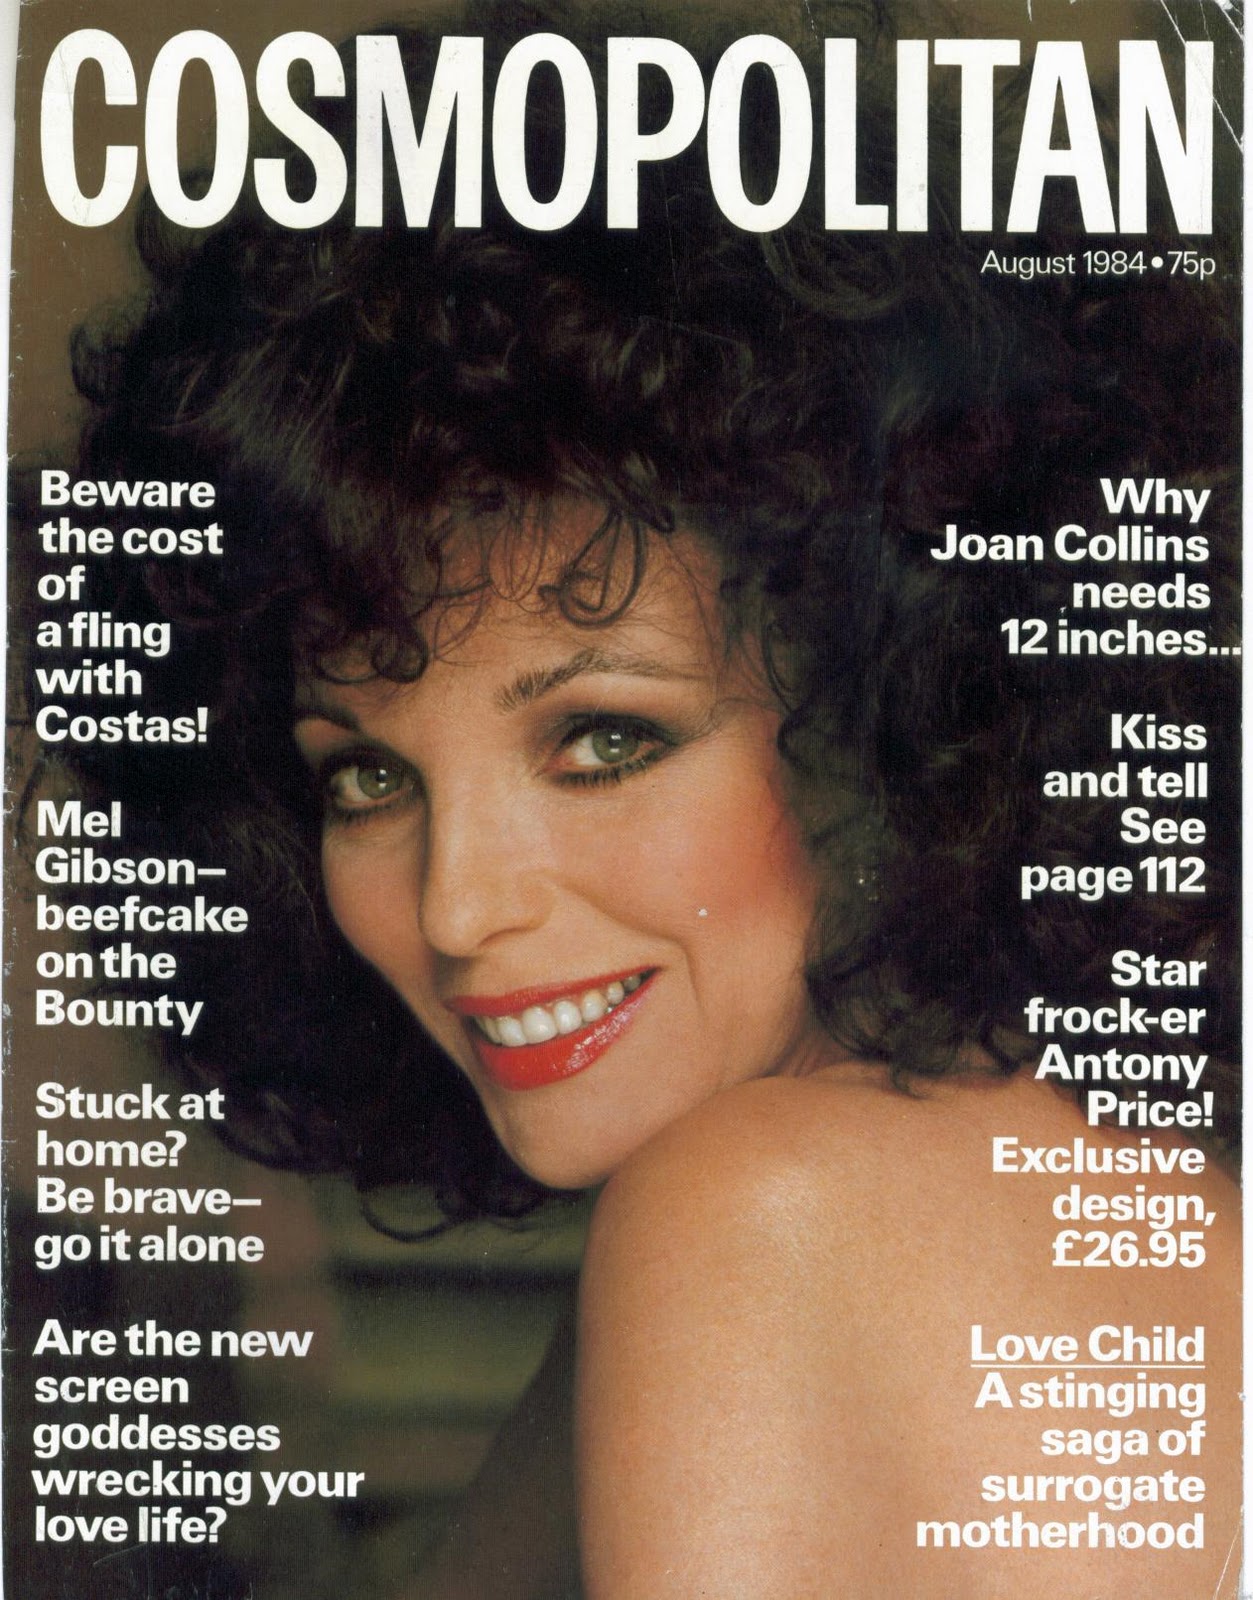 LEGENDARY DAME!: ON THE COVER : COSMOPOLITAN AUGUST 1984 ...